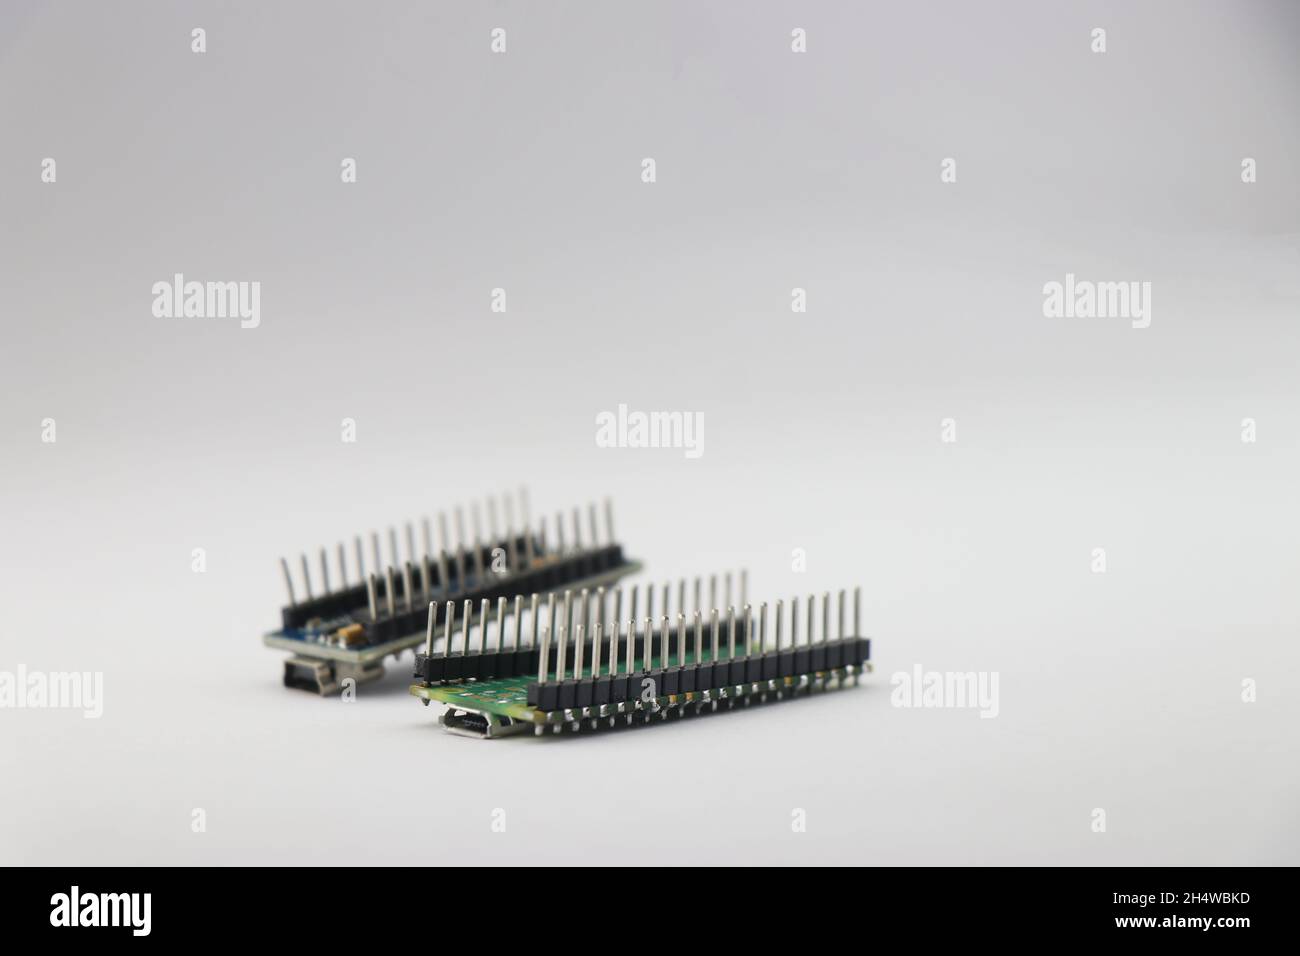 Pins of microcontroller board isolated on white, Header pins of circuit board side view Stock Photo